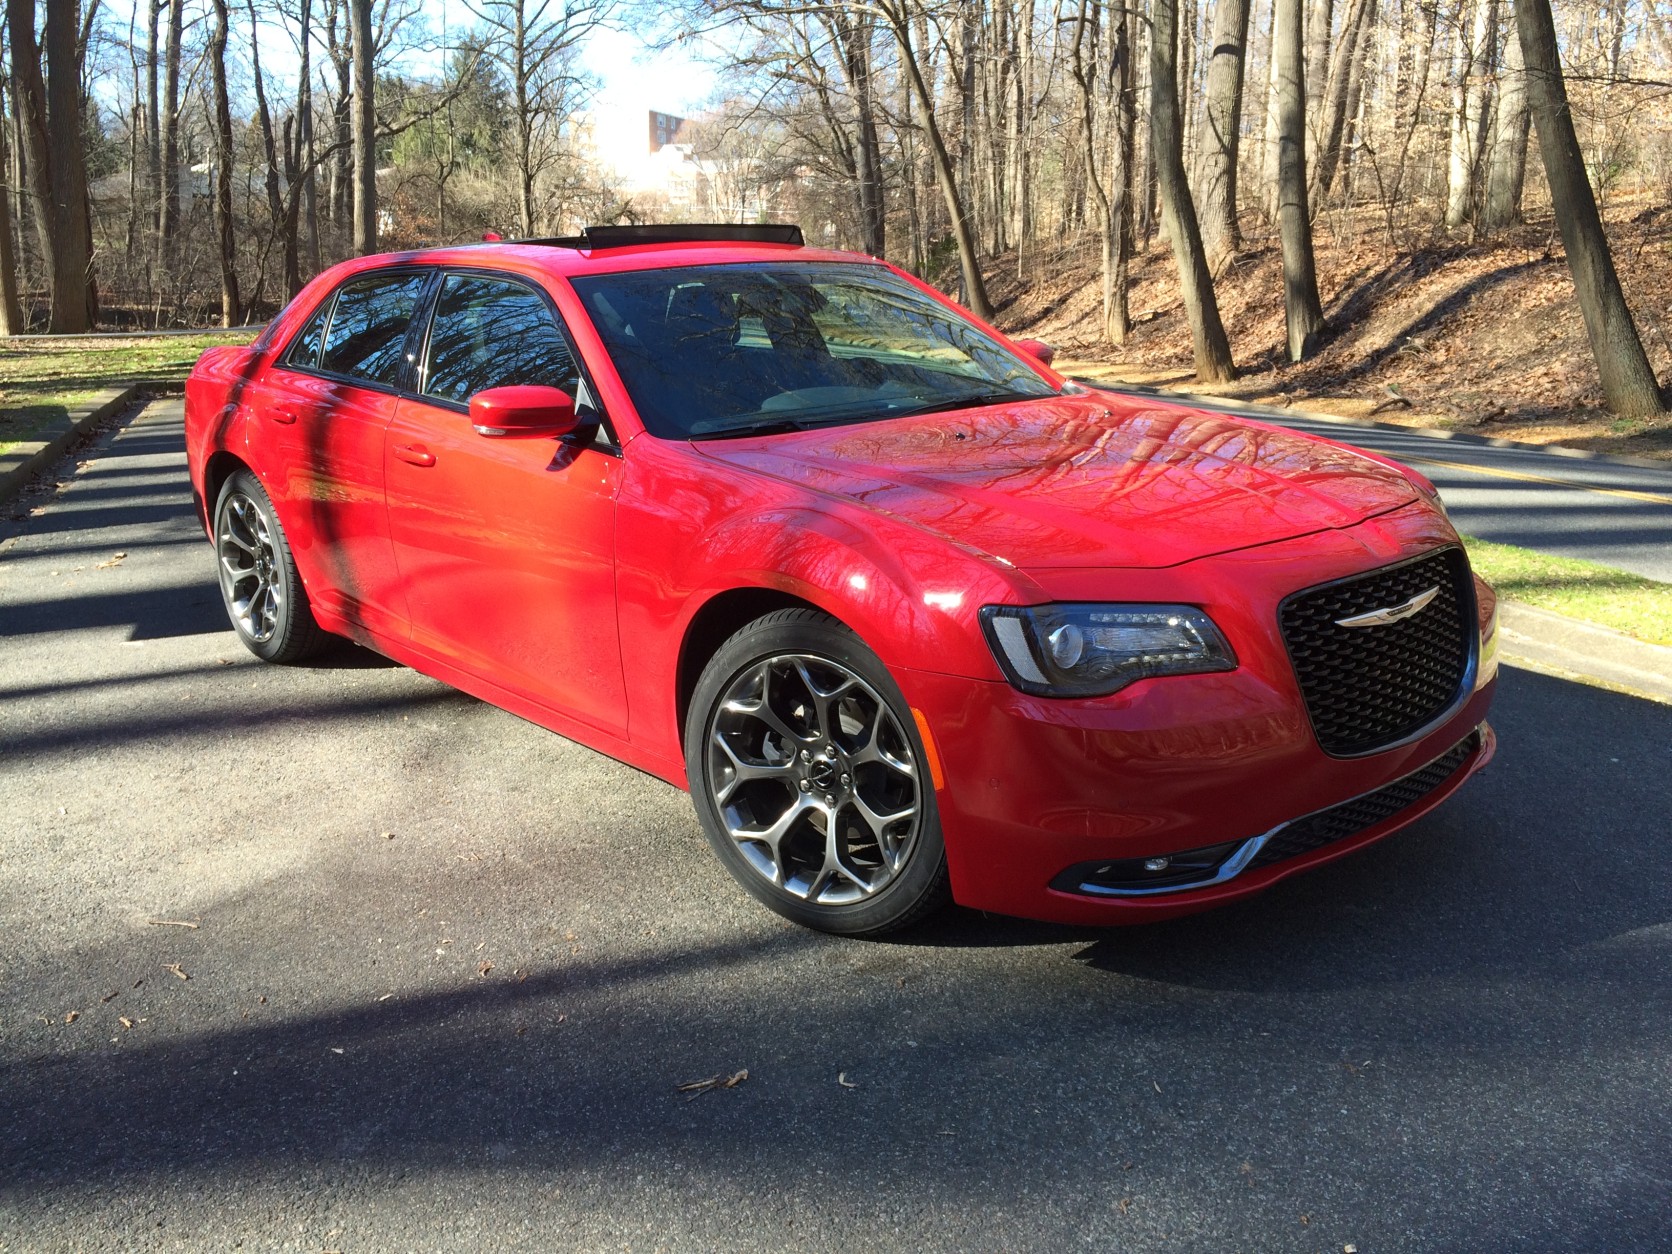 2016 Chrysler 300s Big Sedan With Stand Out Curb Appeal Wtop News